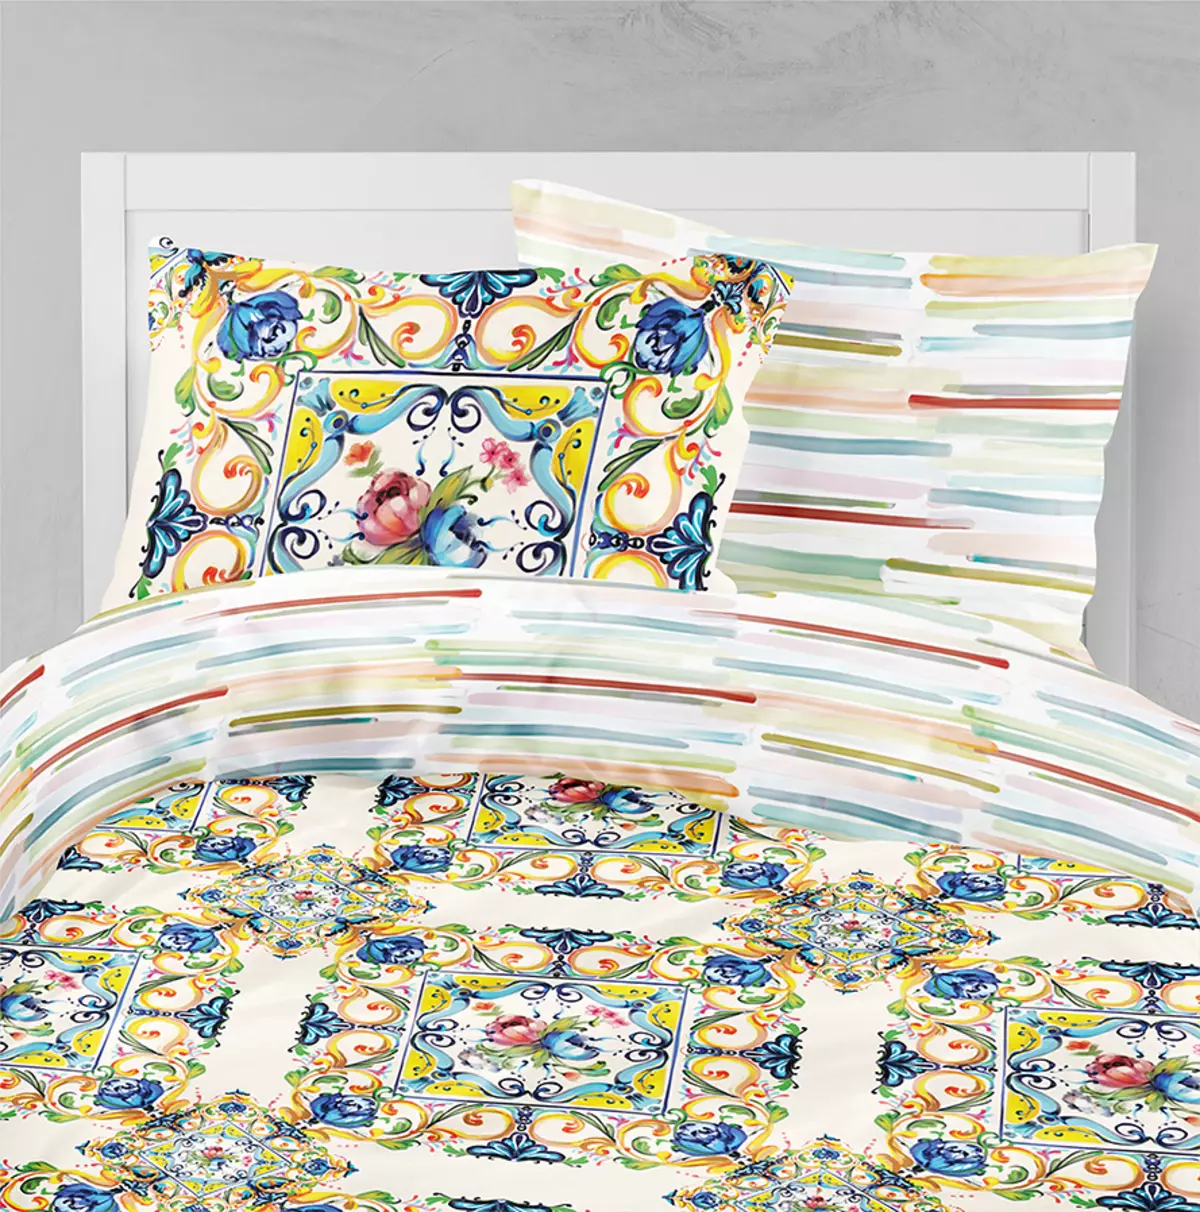 Bed linen MONA LIZA: Satin and Bosi kits, Euro and children's sets from the manufacturer, customer reviews 25829_14